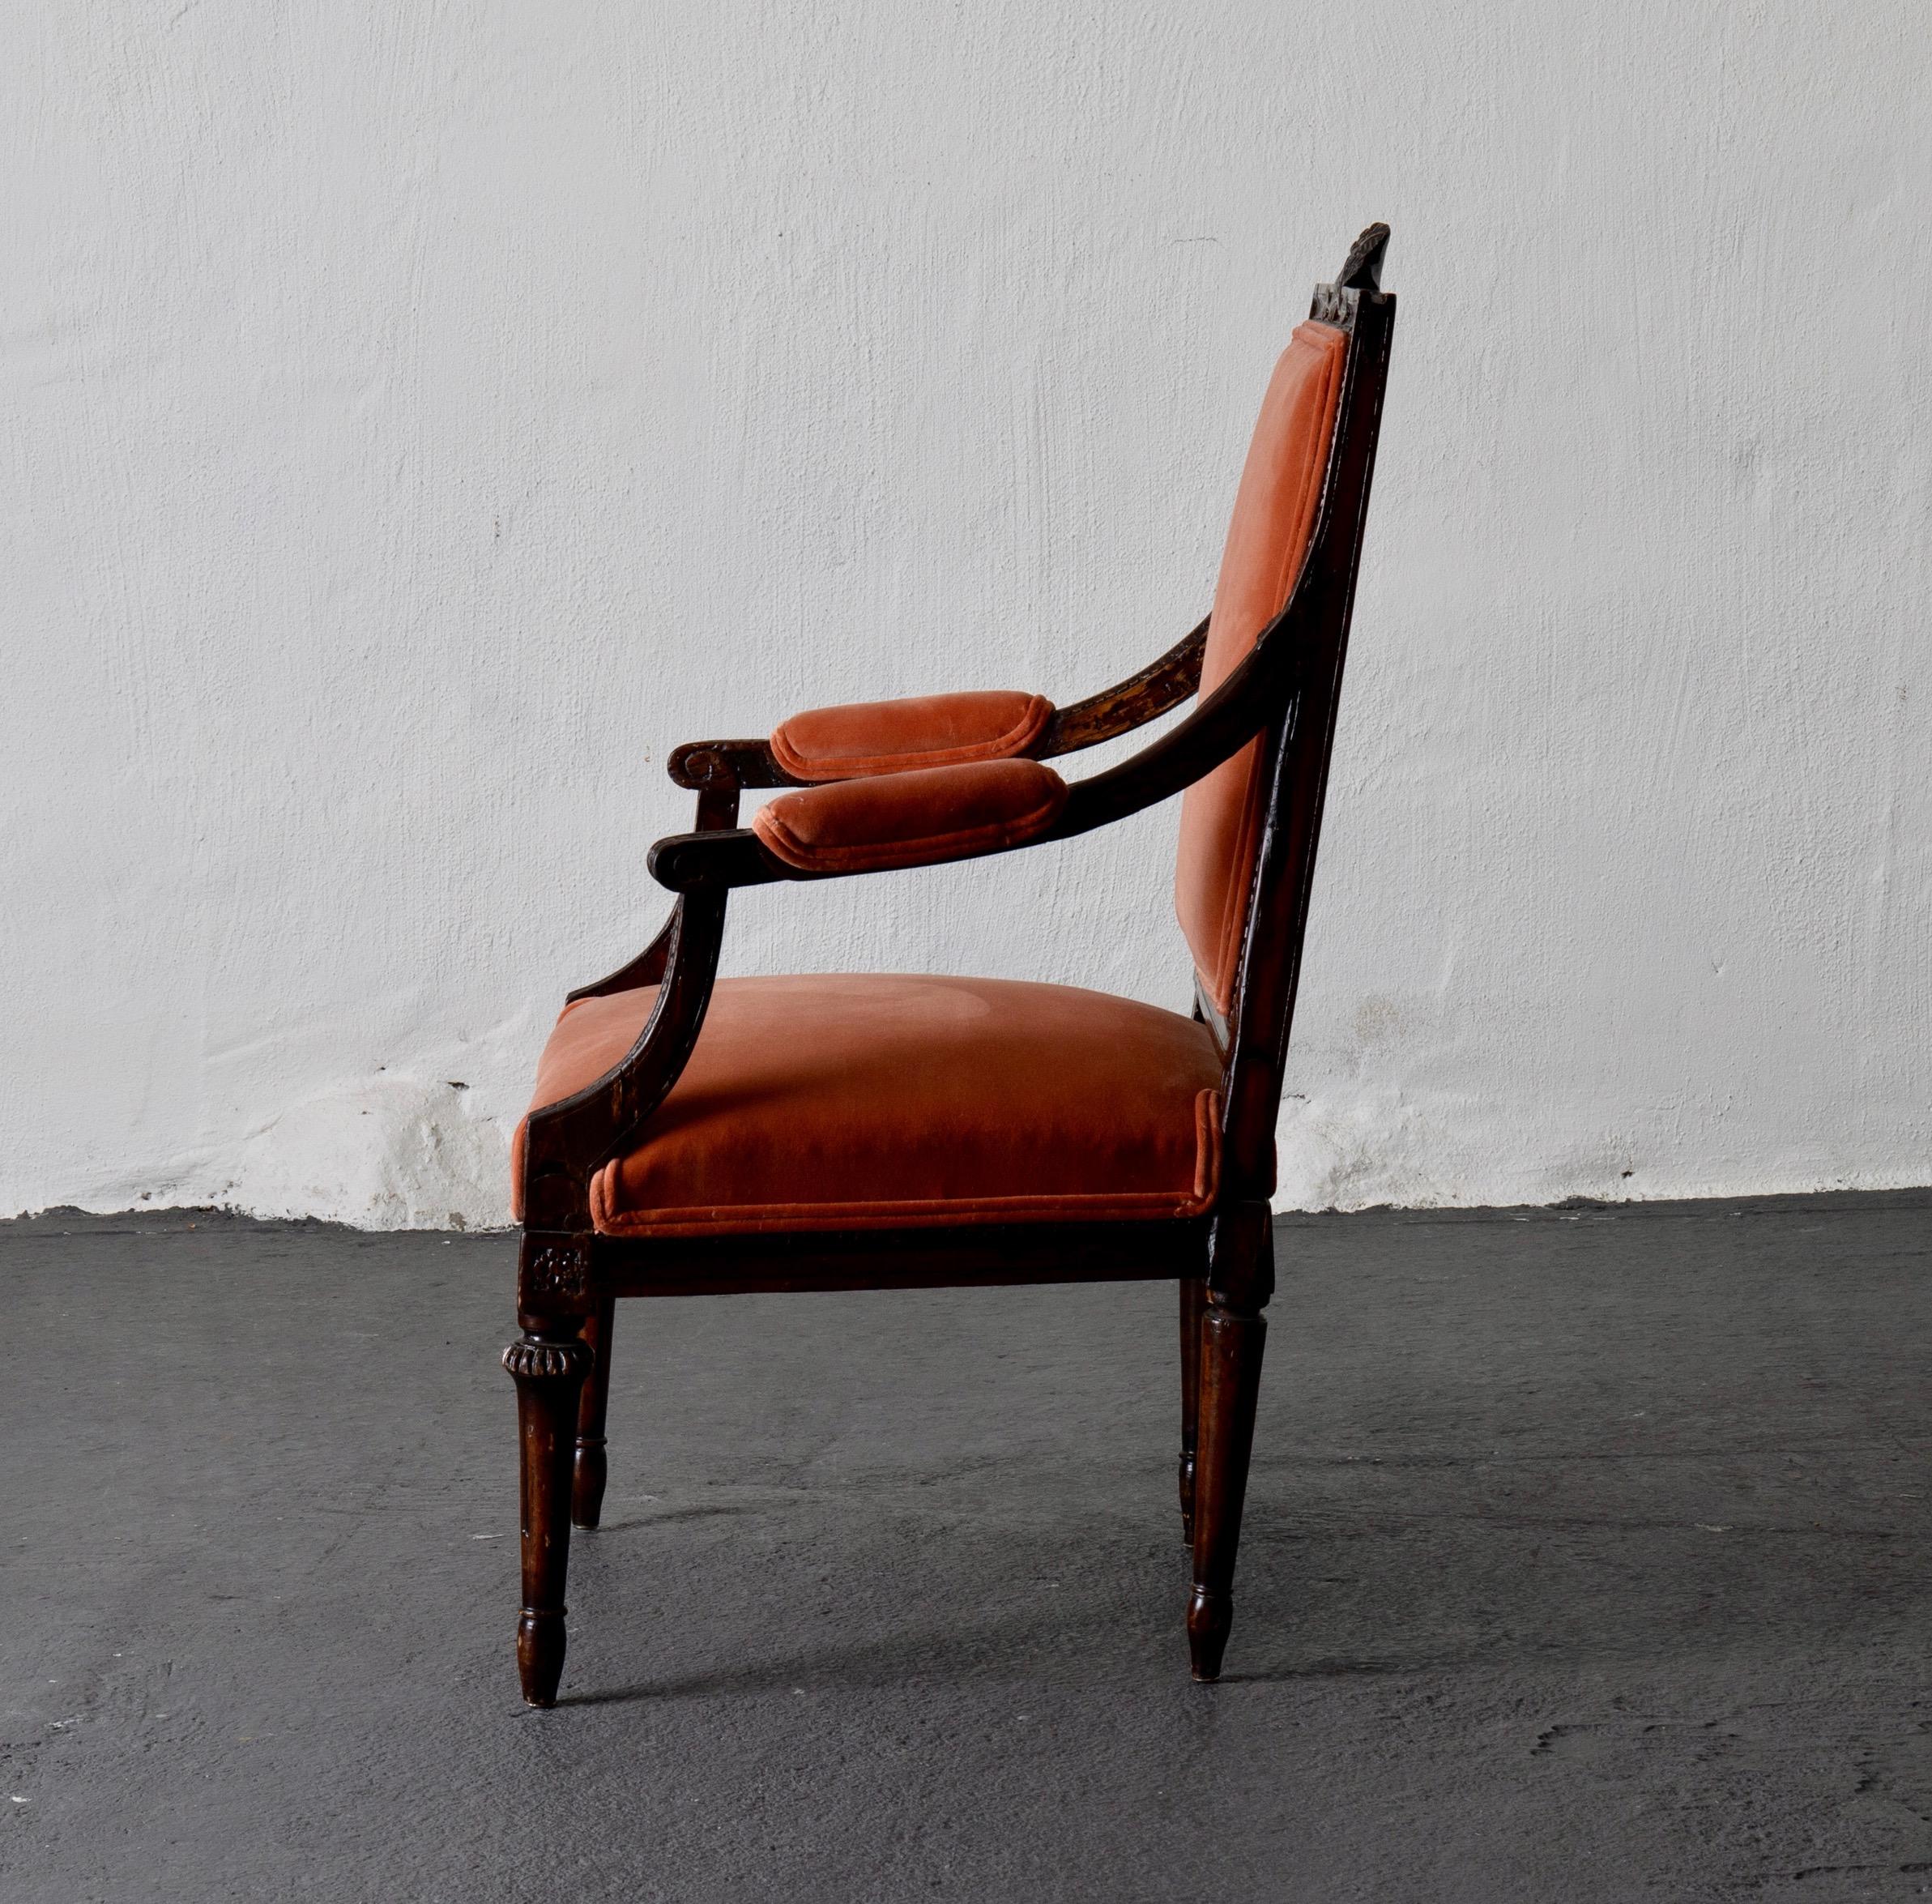 Armchair Swedish Gustavian dark apricot velvet, Sweden. An armchair made in Sweden during the Gustavian period (1790-1810). Carvings on backrest and frieze in the shape of a so called “humle flower